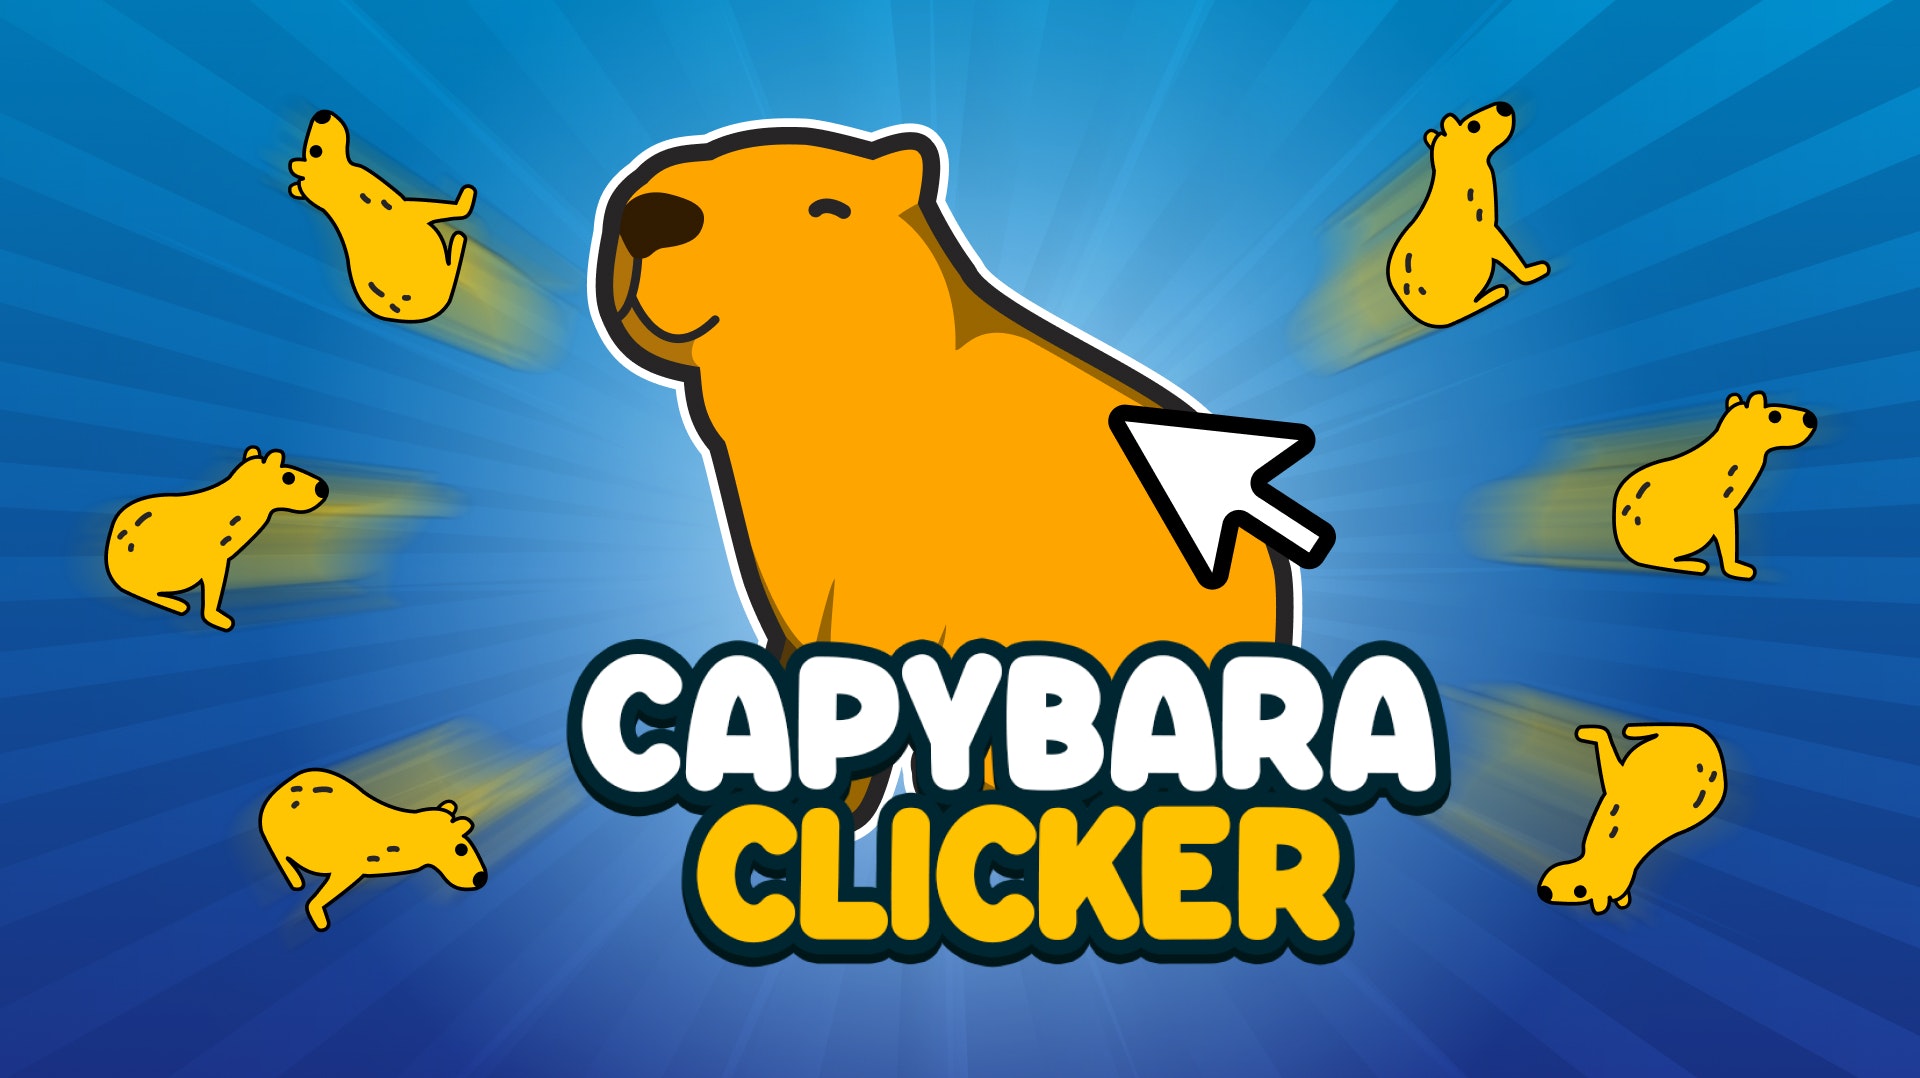 Clicker Games: Play Clicker Games on LittleGames for free